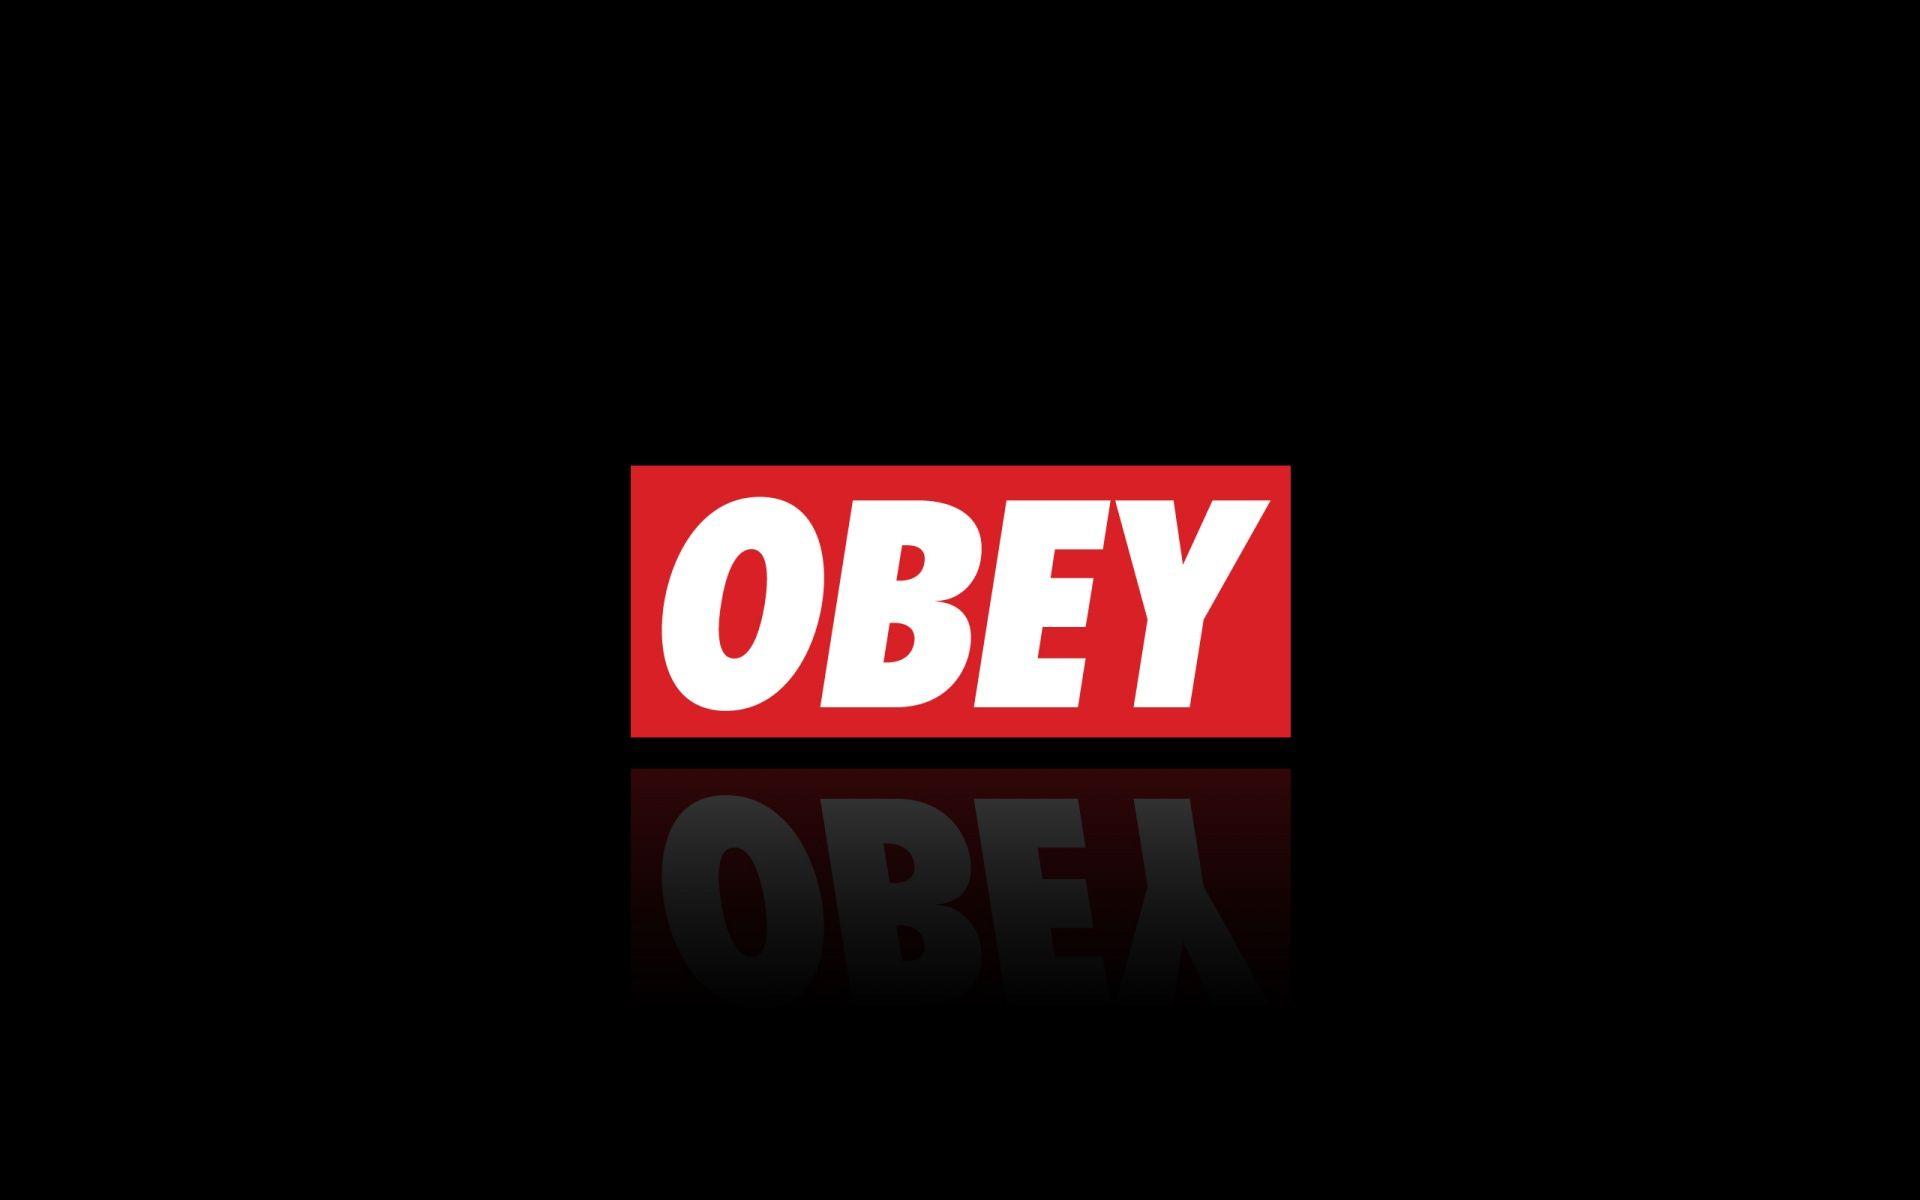 Obey star wallpaper - Vector wallpapers - #14588